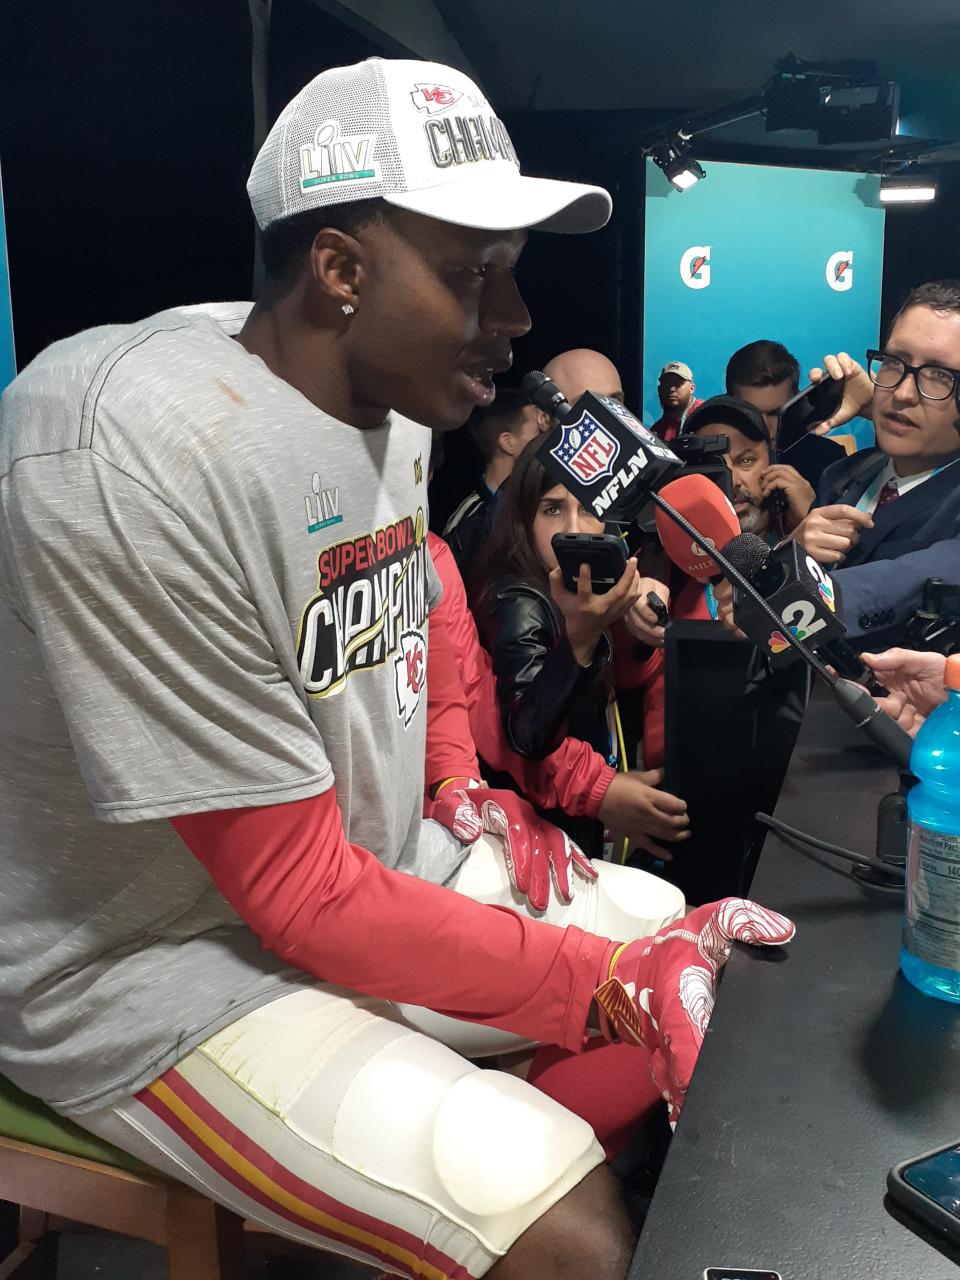 South Fort Myers High School graduate Sammy Watkins talking postgame at Super Bowl LIV after he and the Kansas City Chiefs beat the San Francisco 49ers 31-20 on Sunday, Feb. 2, 2020.